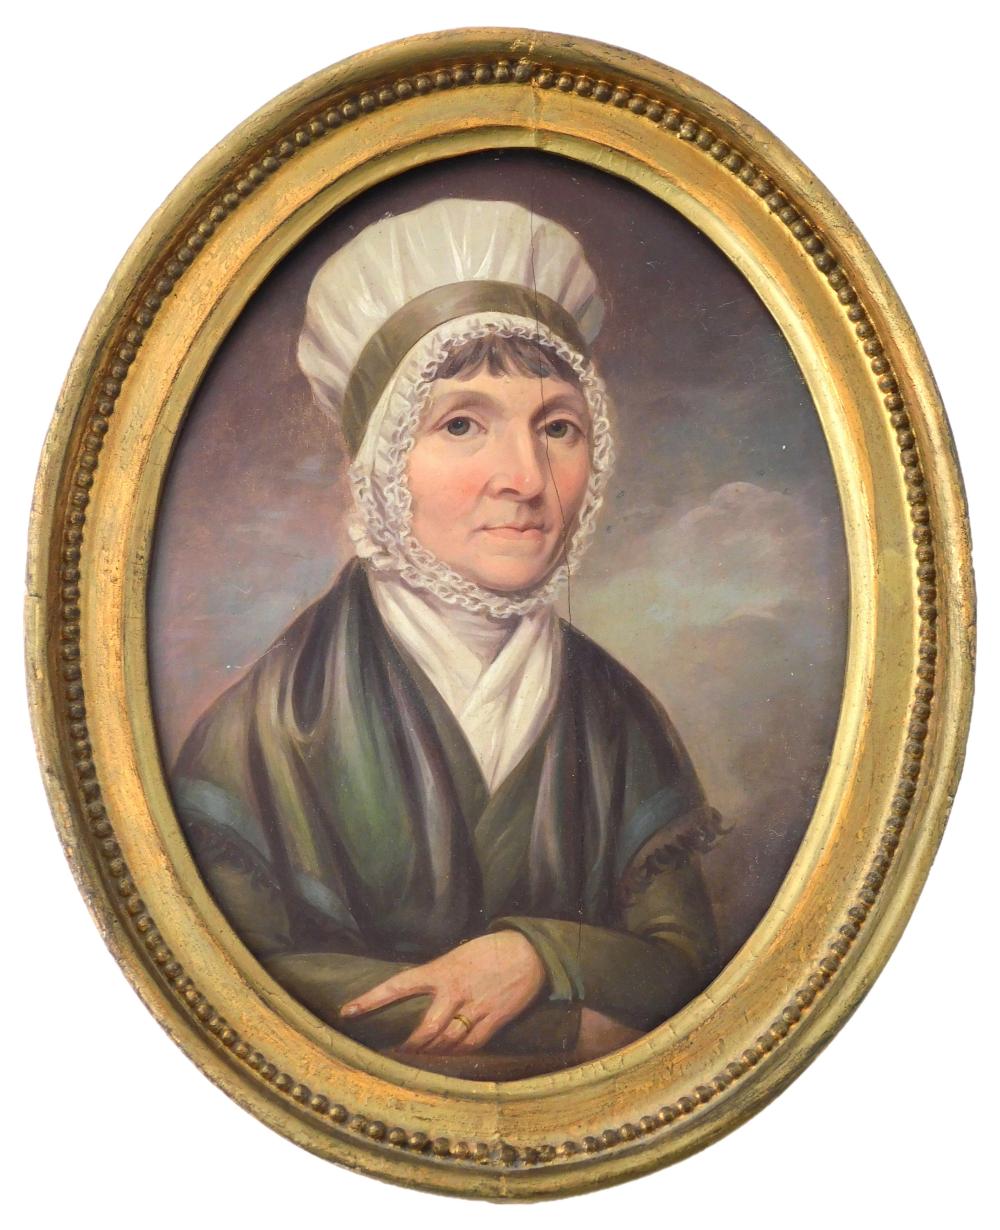 PORTRAIT OF MARY MIDDLETOWN (NEE